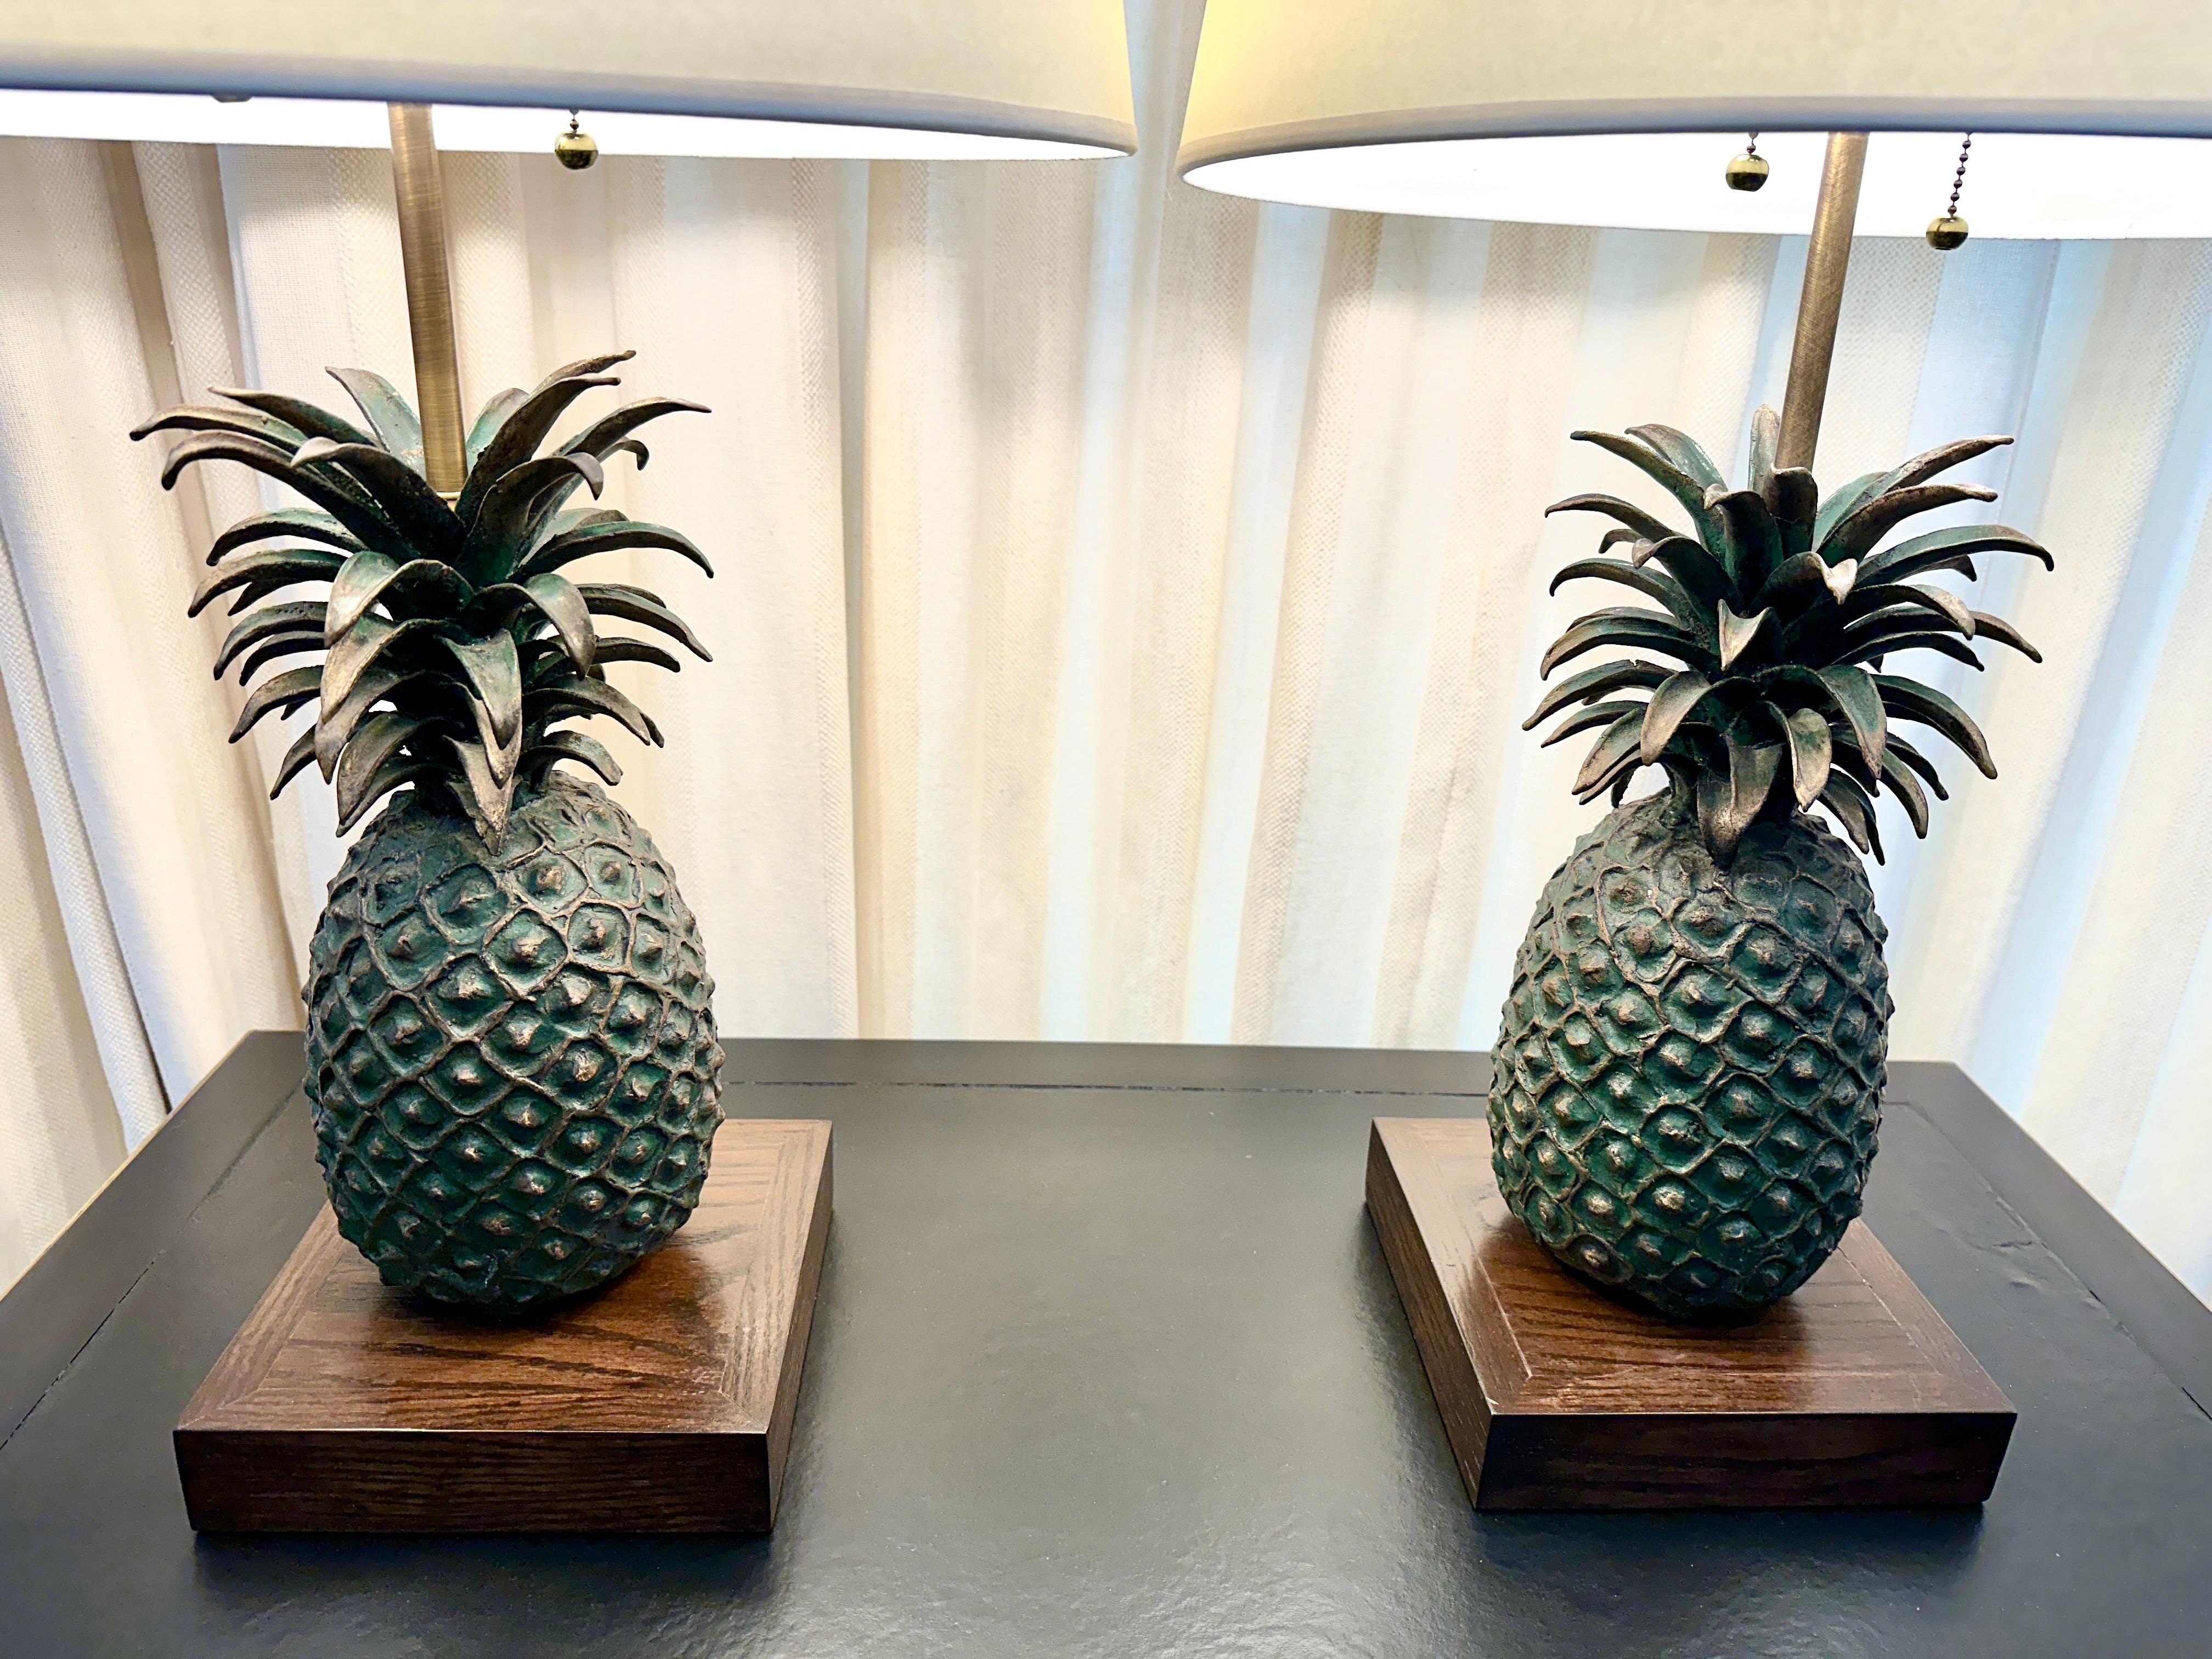 These pineapples were made from the lost wax process in early 20th C. Pineapples are a traditional Western symbol of welcome.  They are heavy solid bronze pineapples mounted on a stained oak wood base, the patina to the bronze has a green hue (see